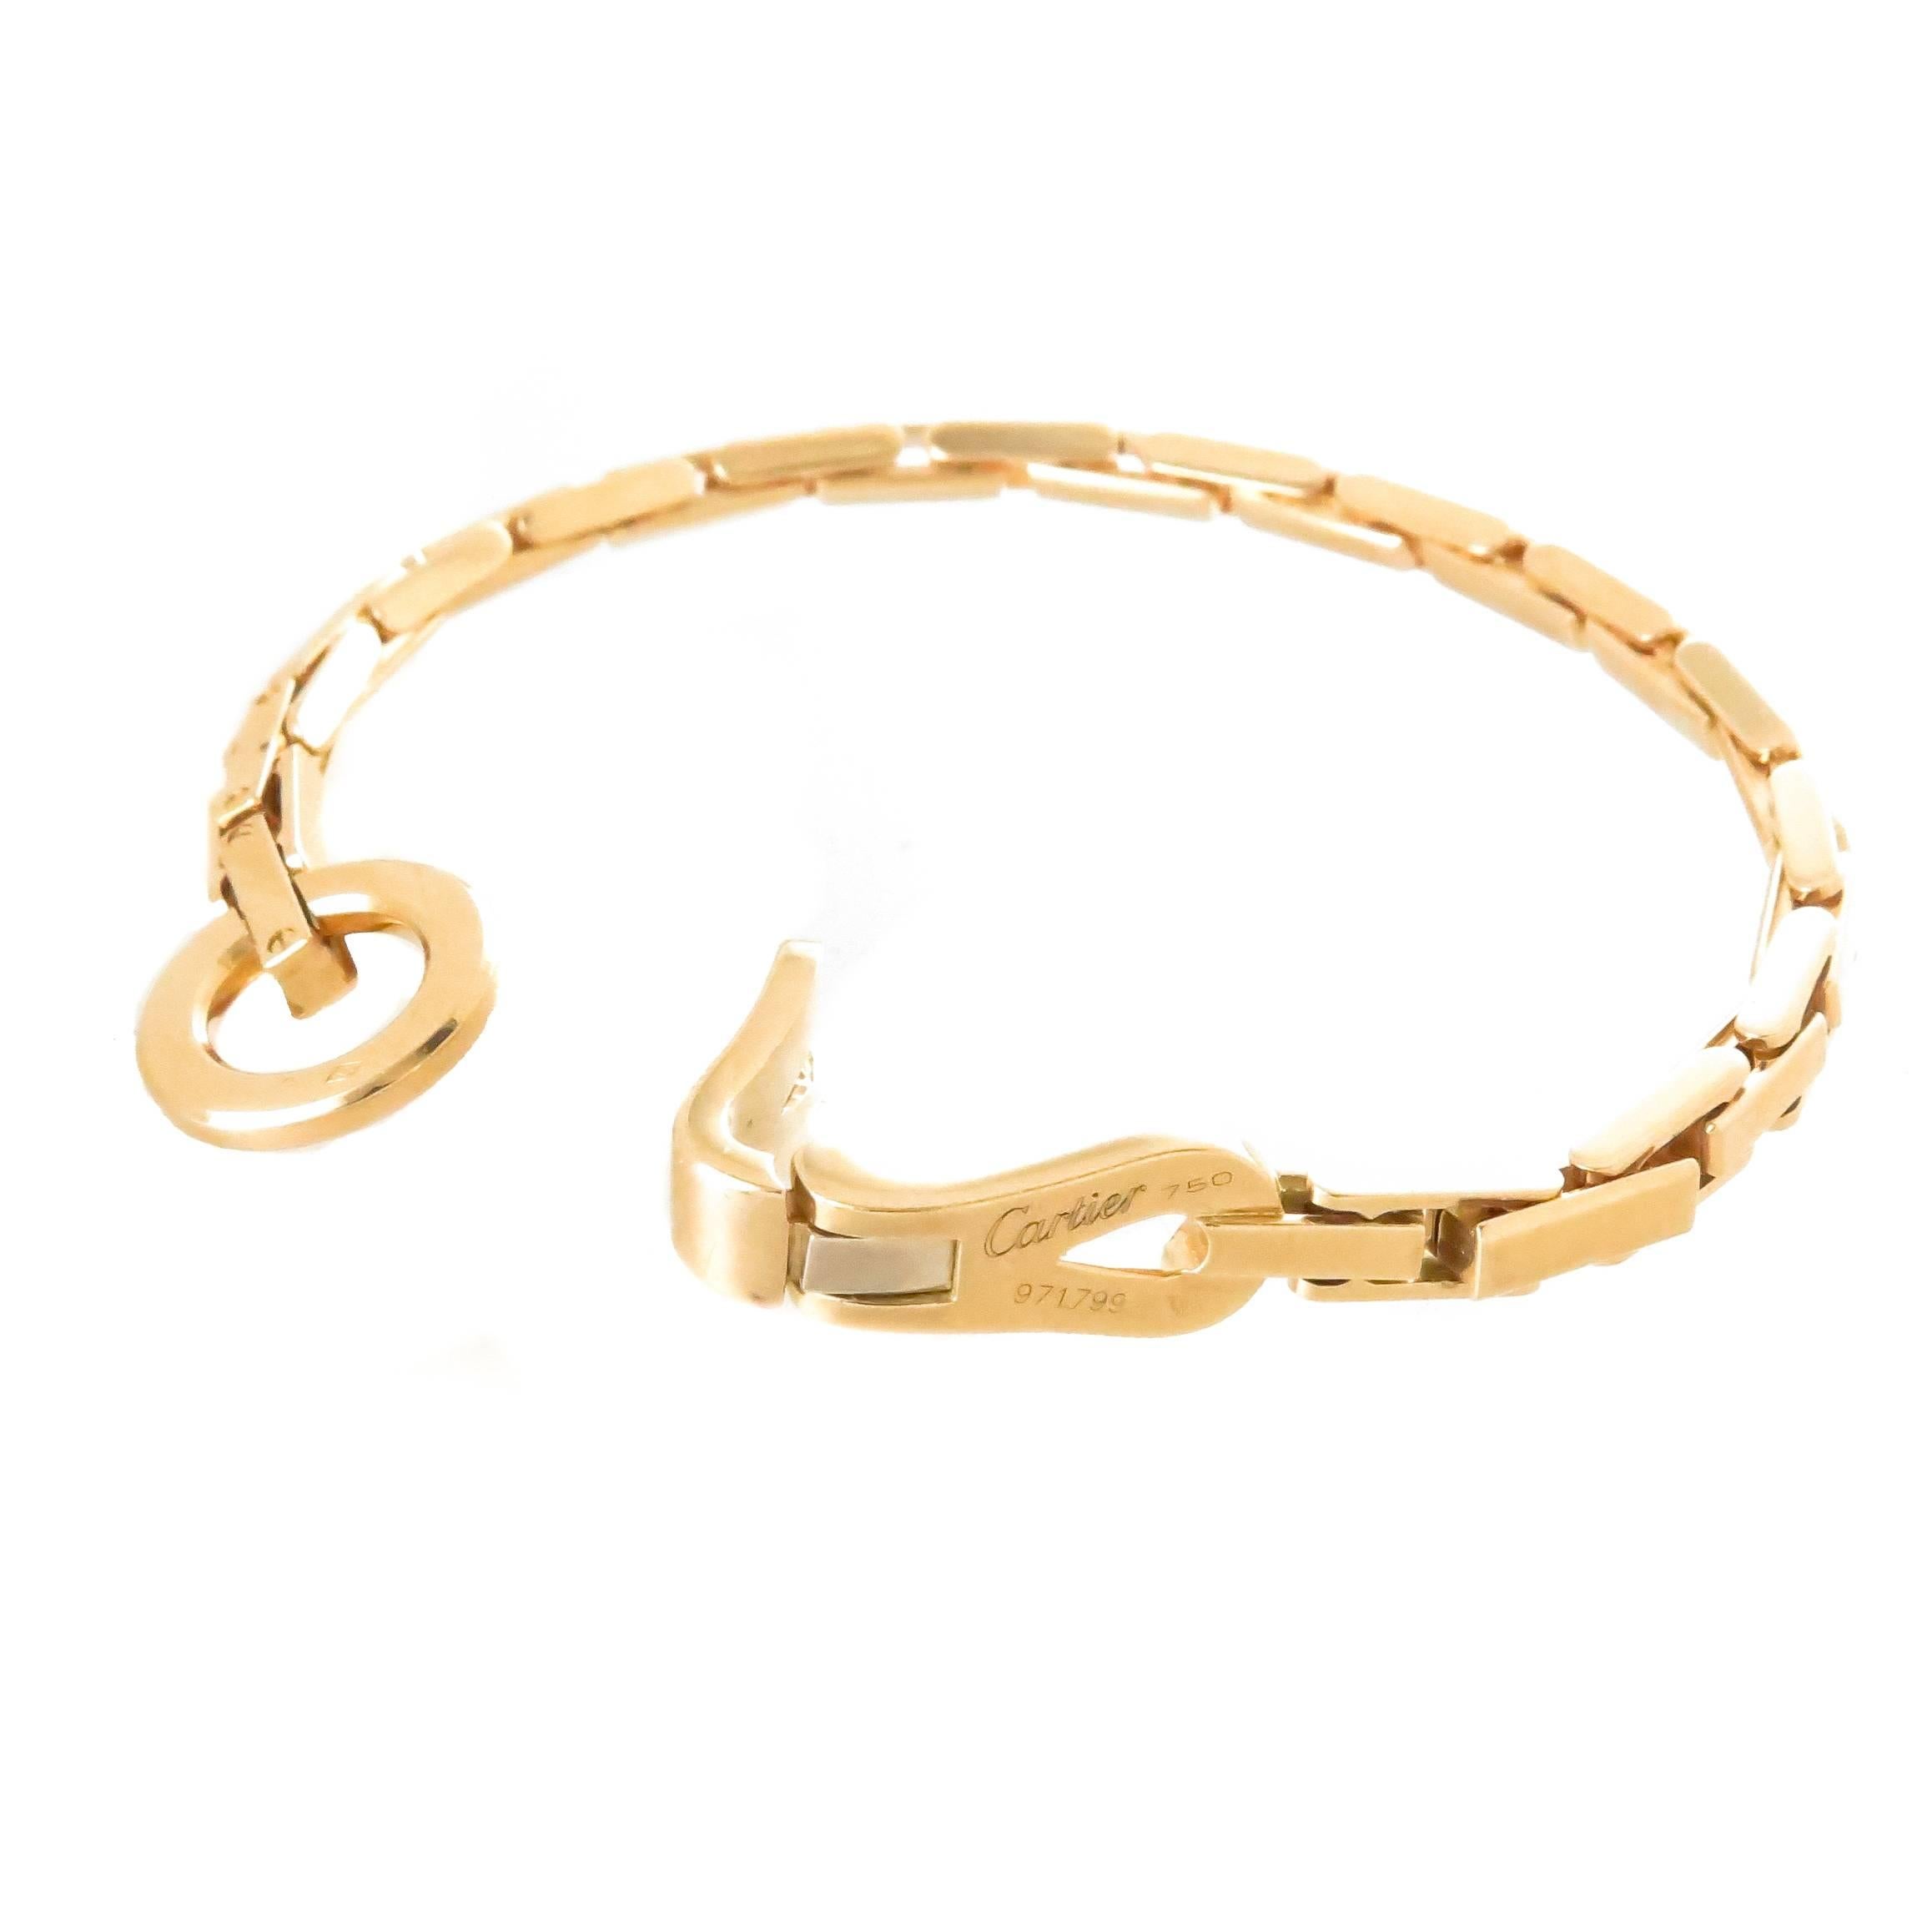 Circa 2010  Cartier Agrafe collection 18K yellow Gold bracelet, measuring 7 1/2 inches in length and 3/16 inch wide. Comprising interlocking elongated box links. Comes in the original Cartier presentation box.